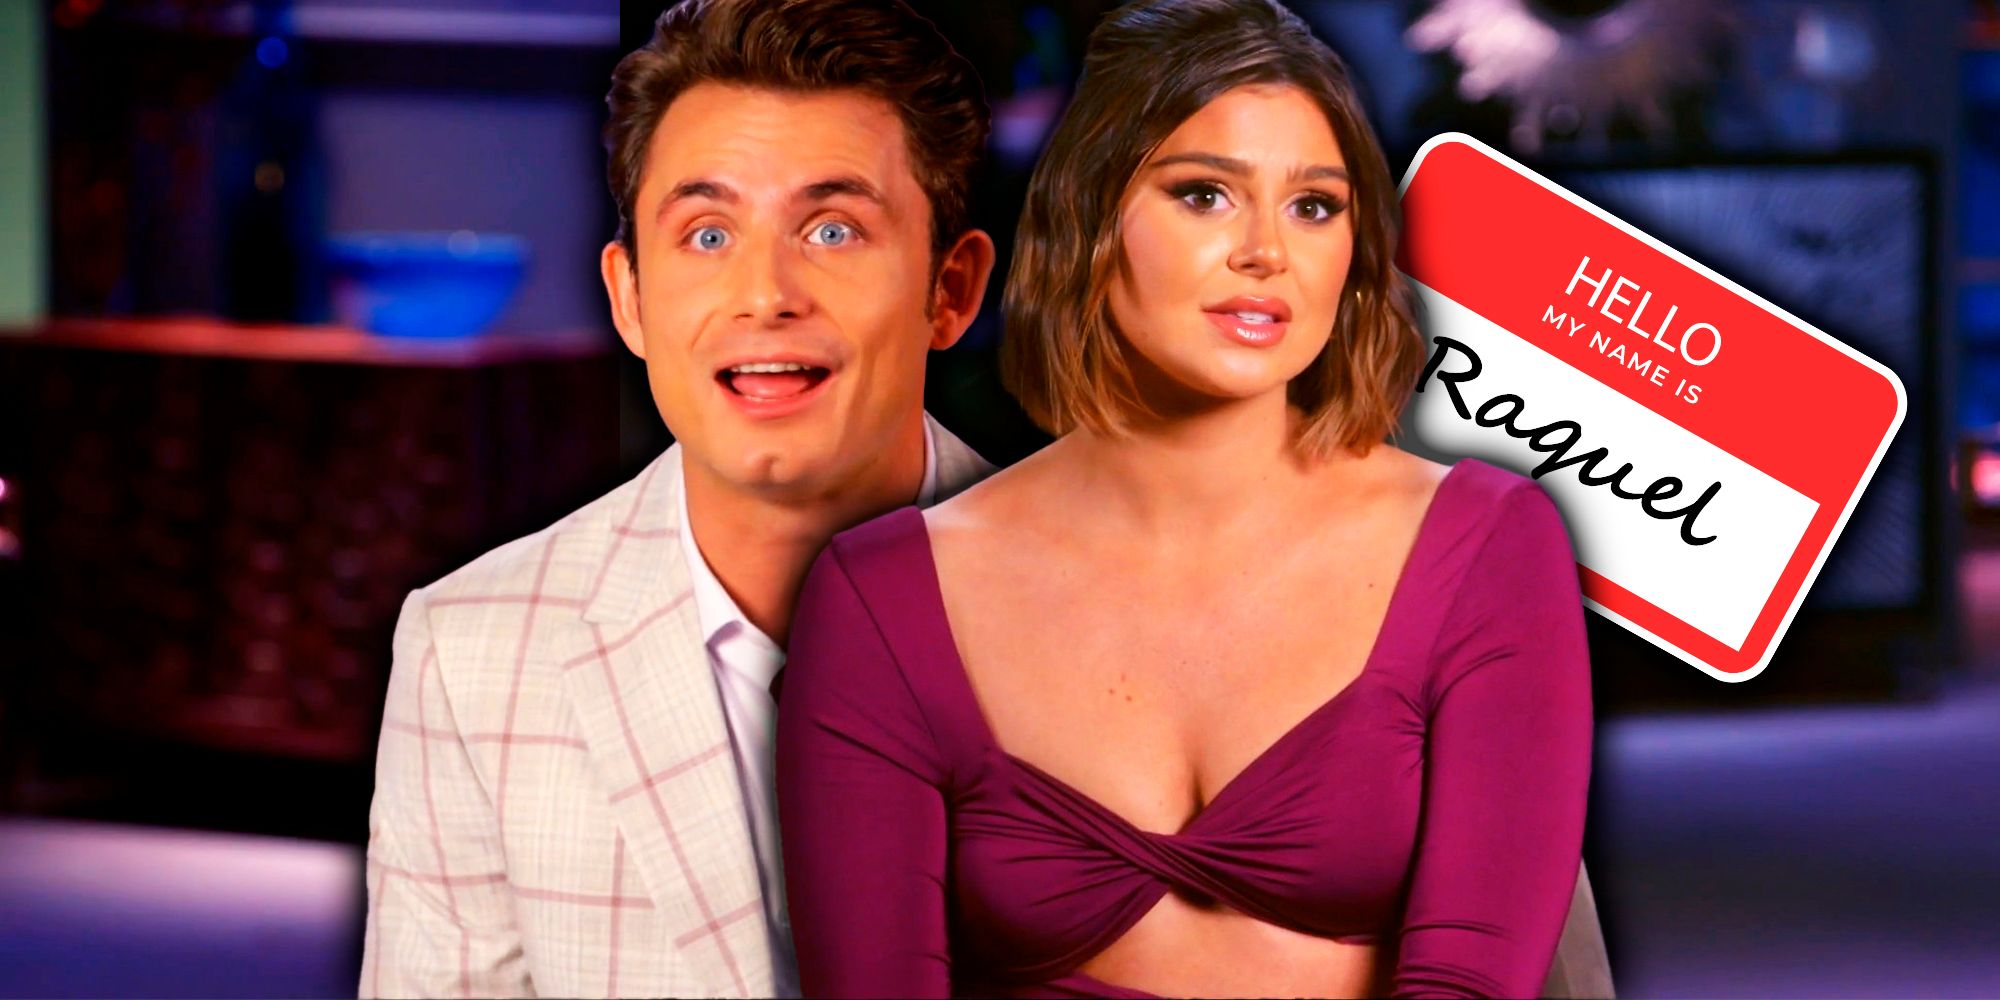 james kennedy and raquel leviss montage with hellp my name is raquel tag vanderpump rules